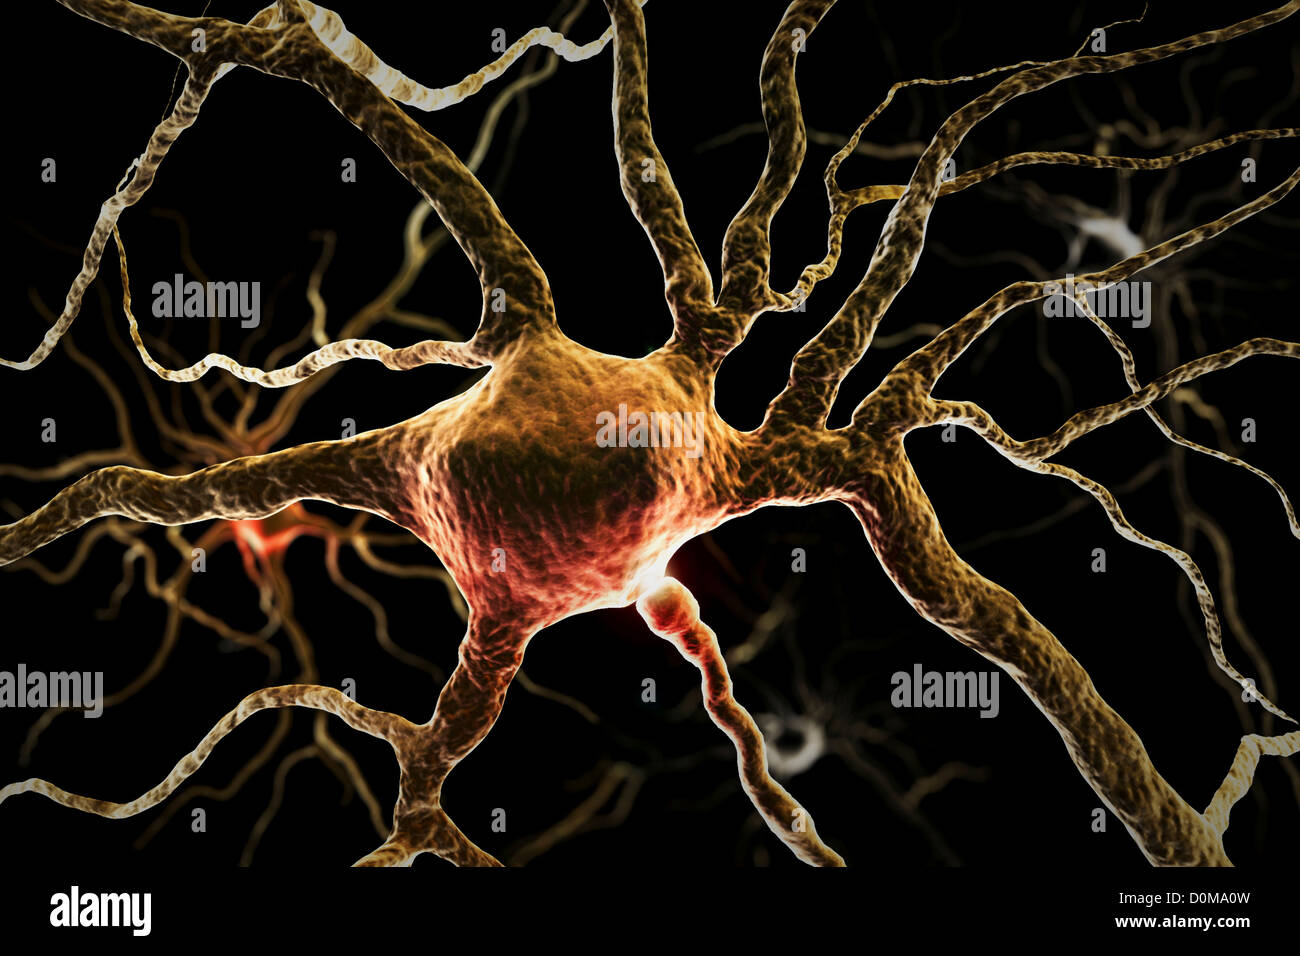 Microscopic styled visualization of neurons. Stock Photo